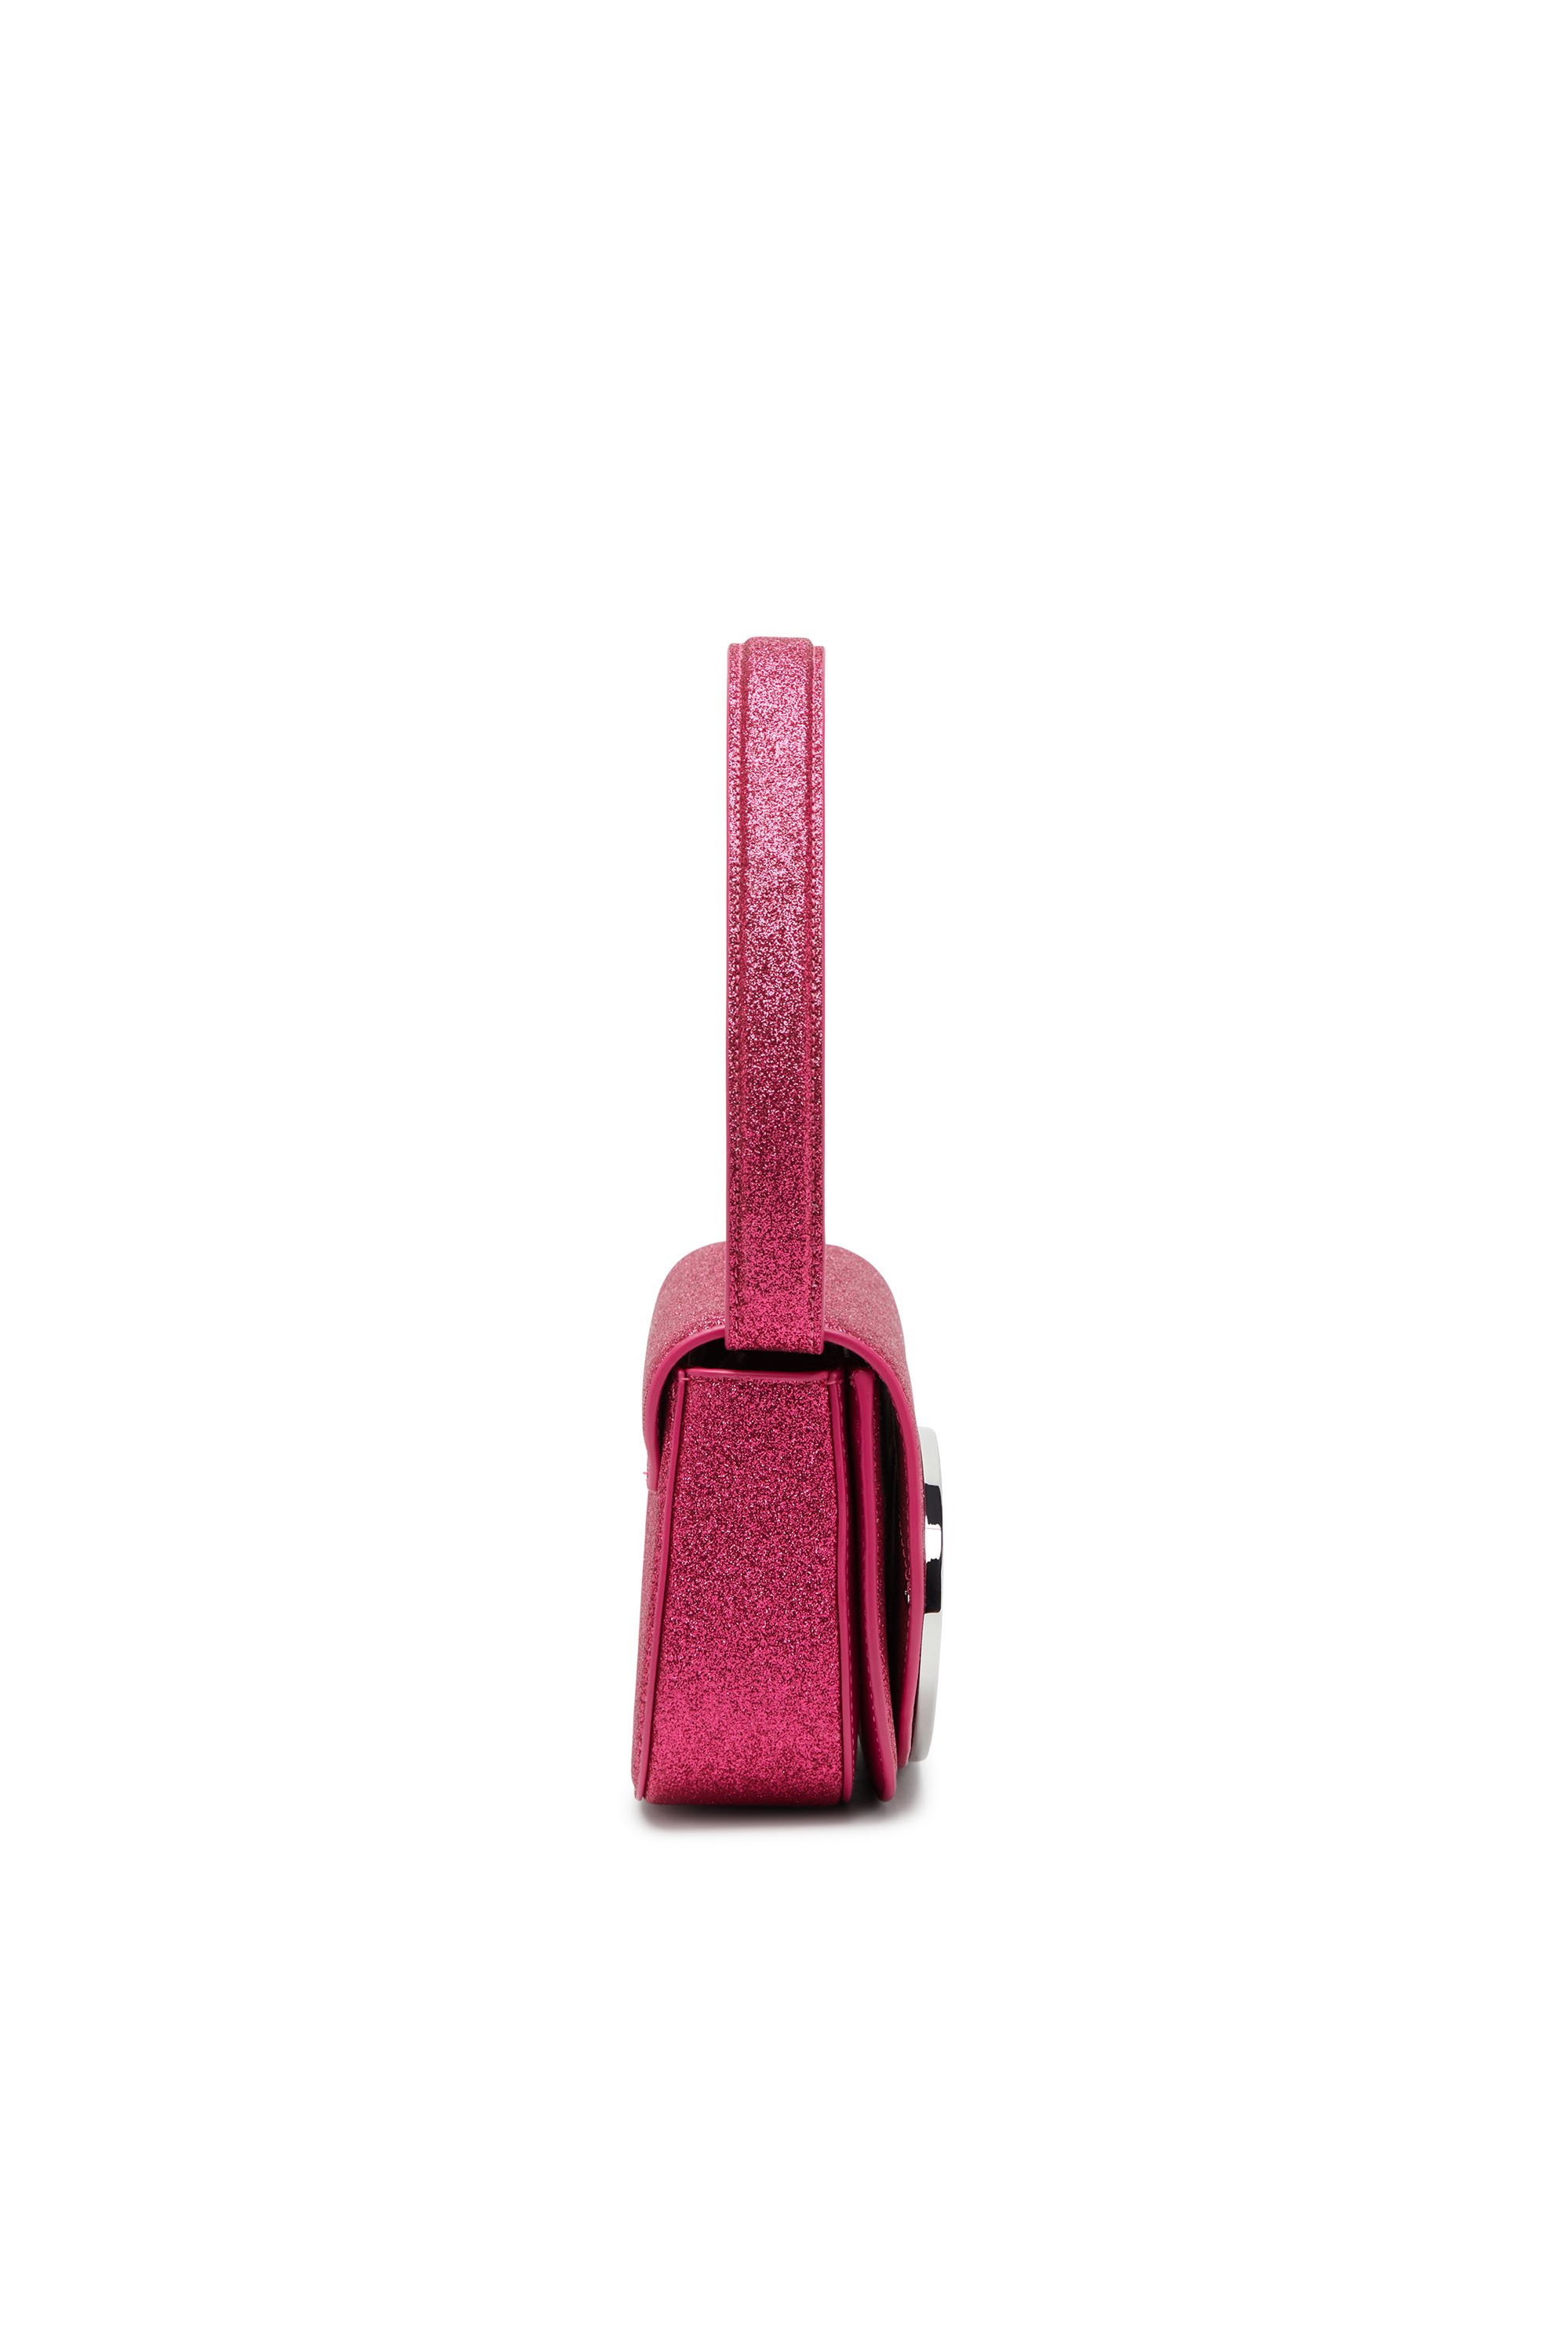 Diesel - 1DR, Woman 1DR-Iconic shoulder bag in glitter fabric in Pink - Image 3